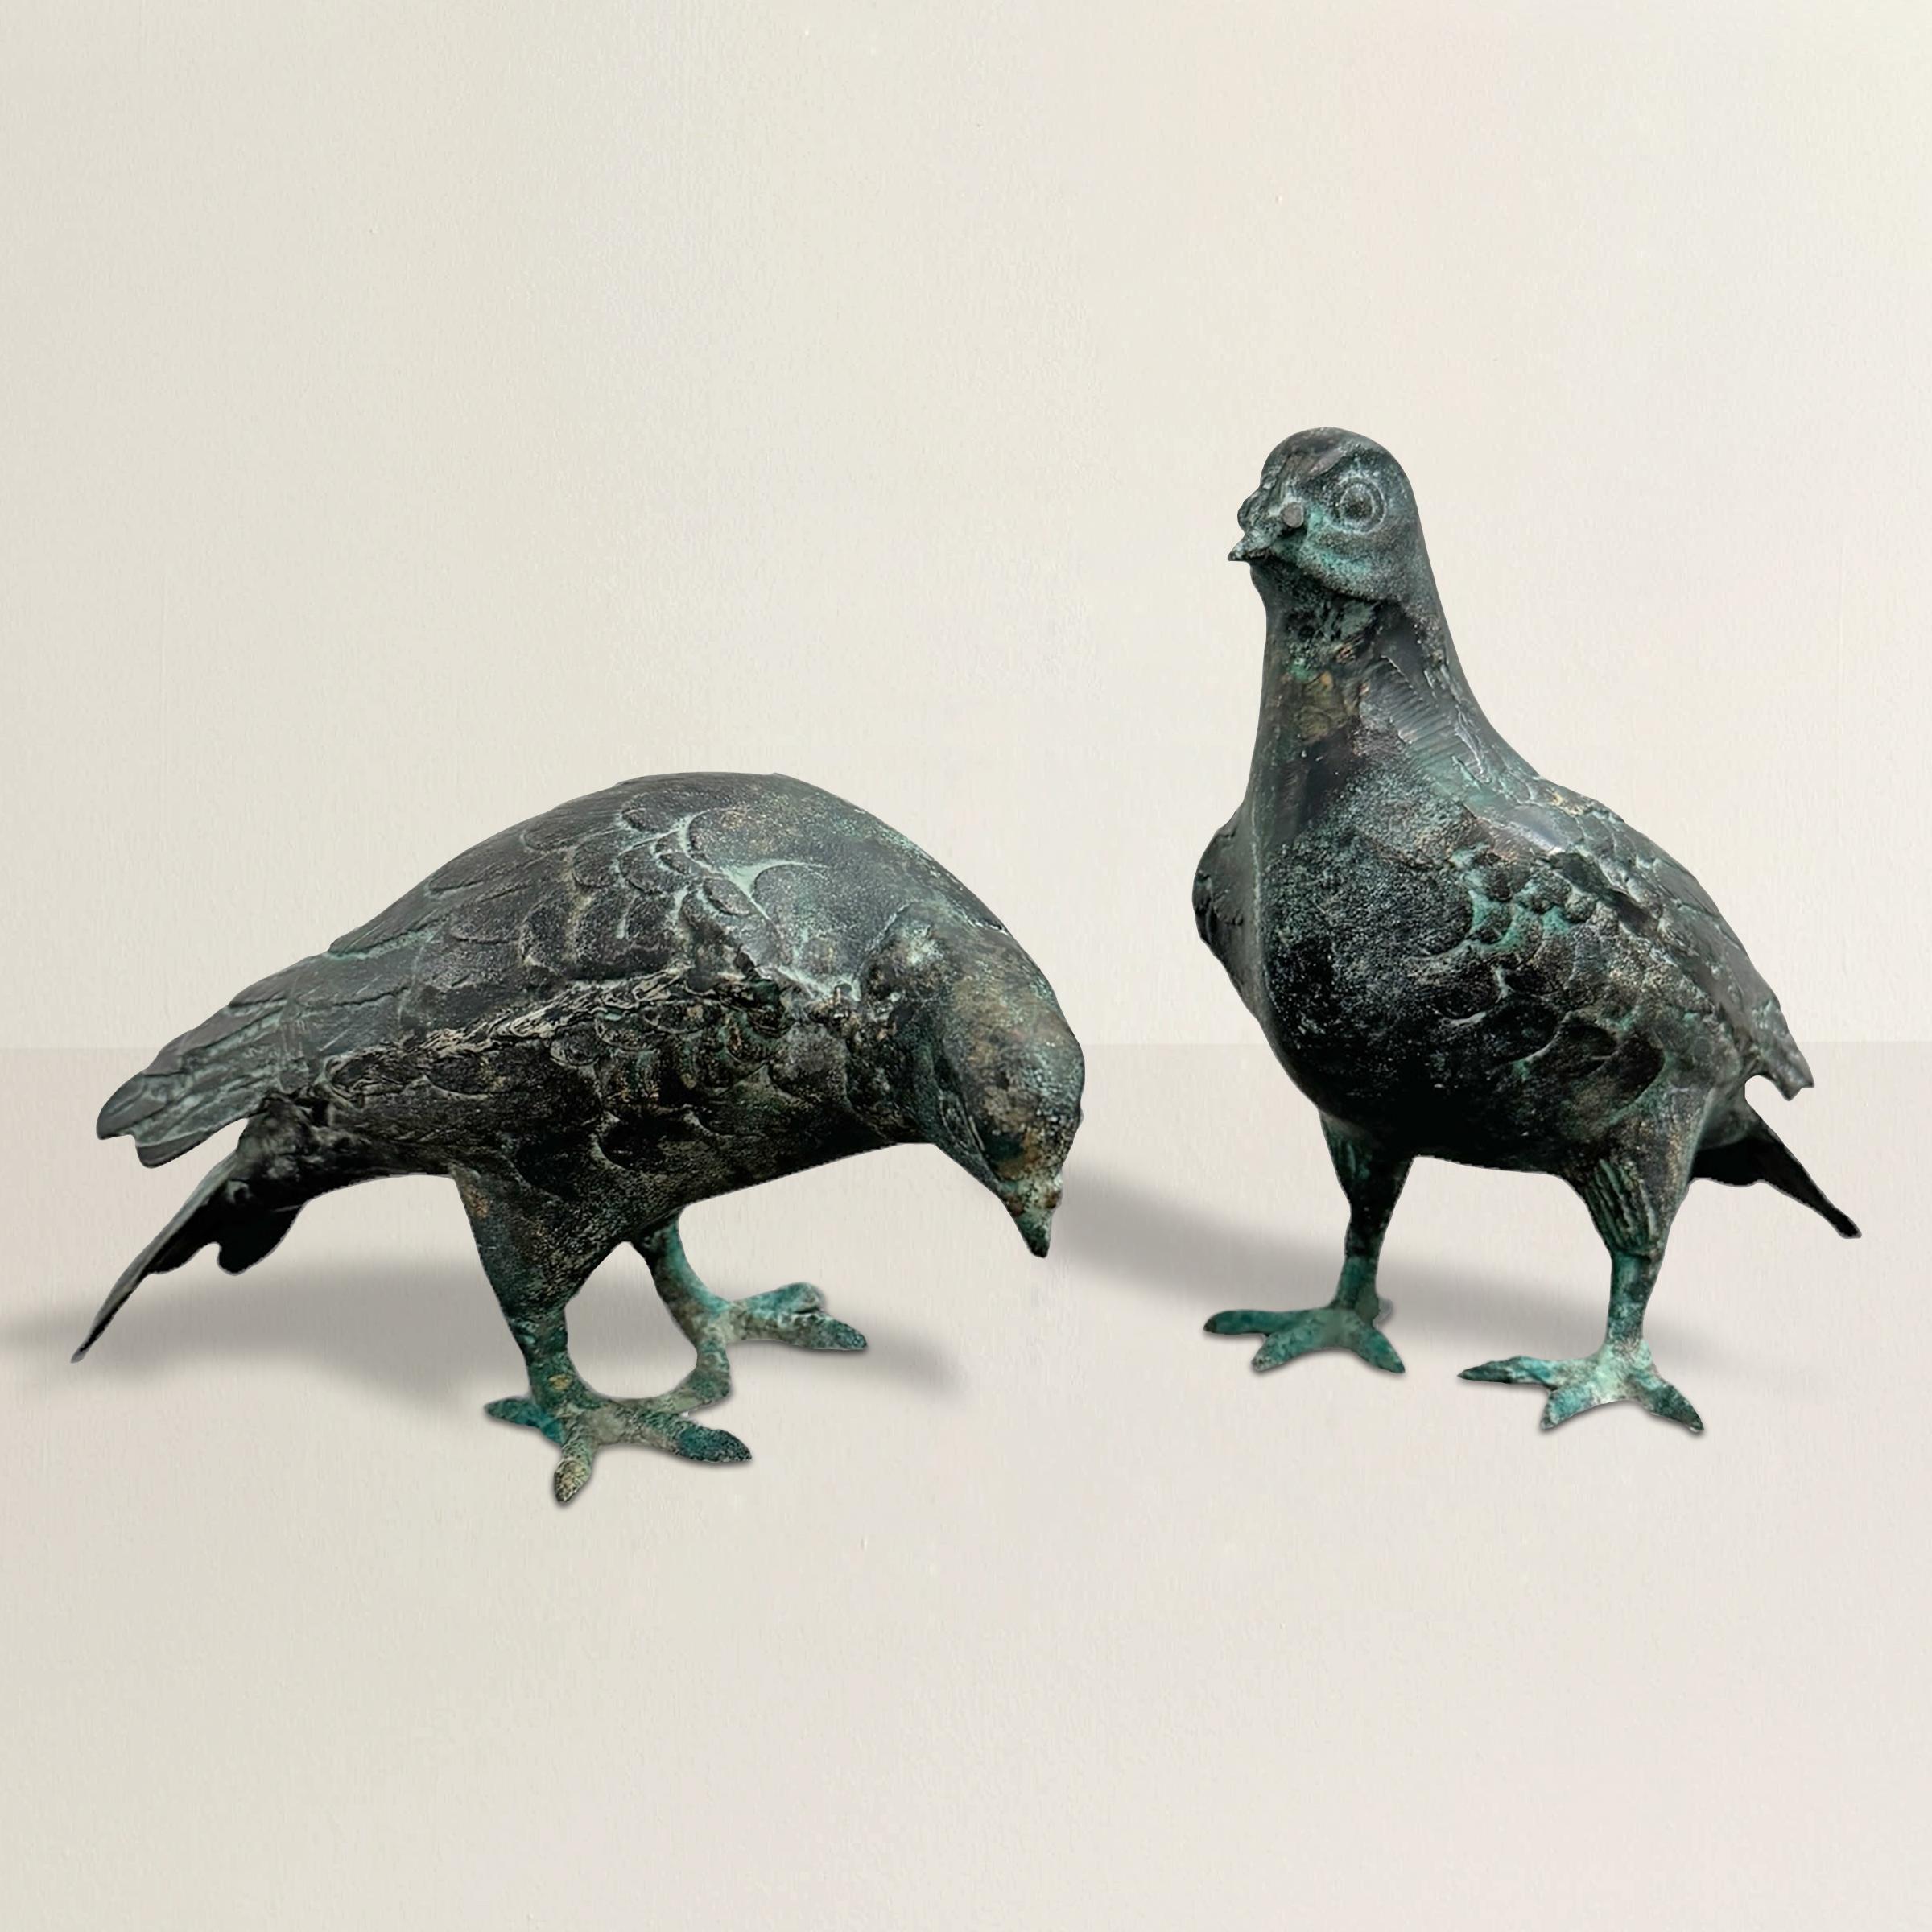 This exquisite pair of 20th-century cast metal Mourning Doves features one bird standing upright and the other gracefully bent over, designed to elegantly peer over the edge of a bookshelf or fireplace mantle. The doves are finished with a verdigris